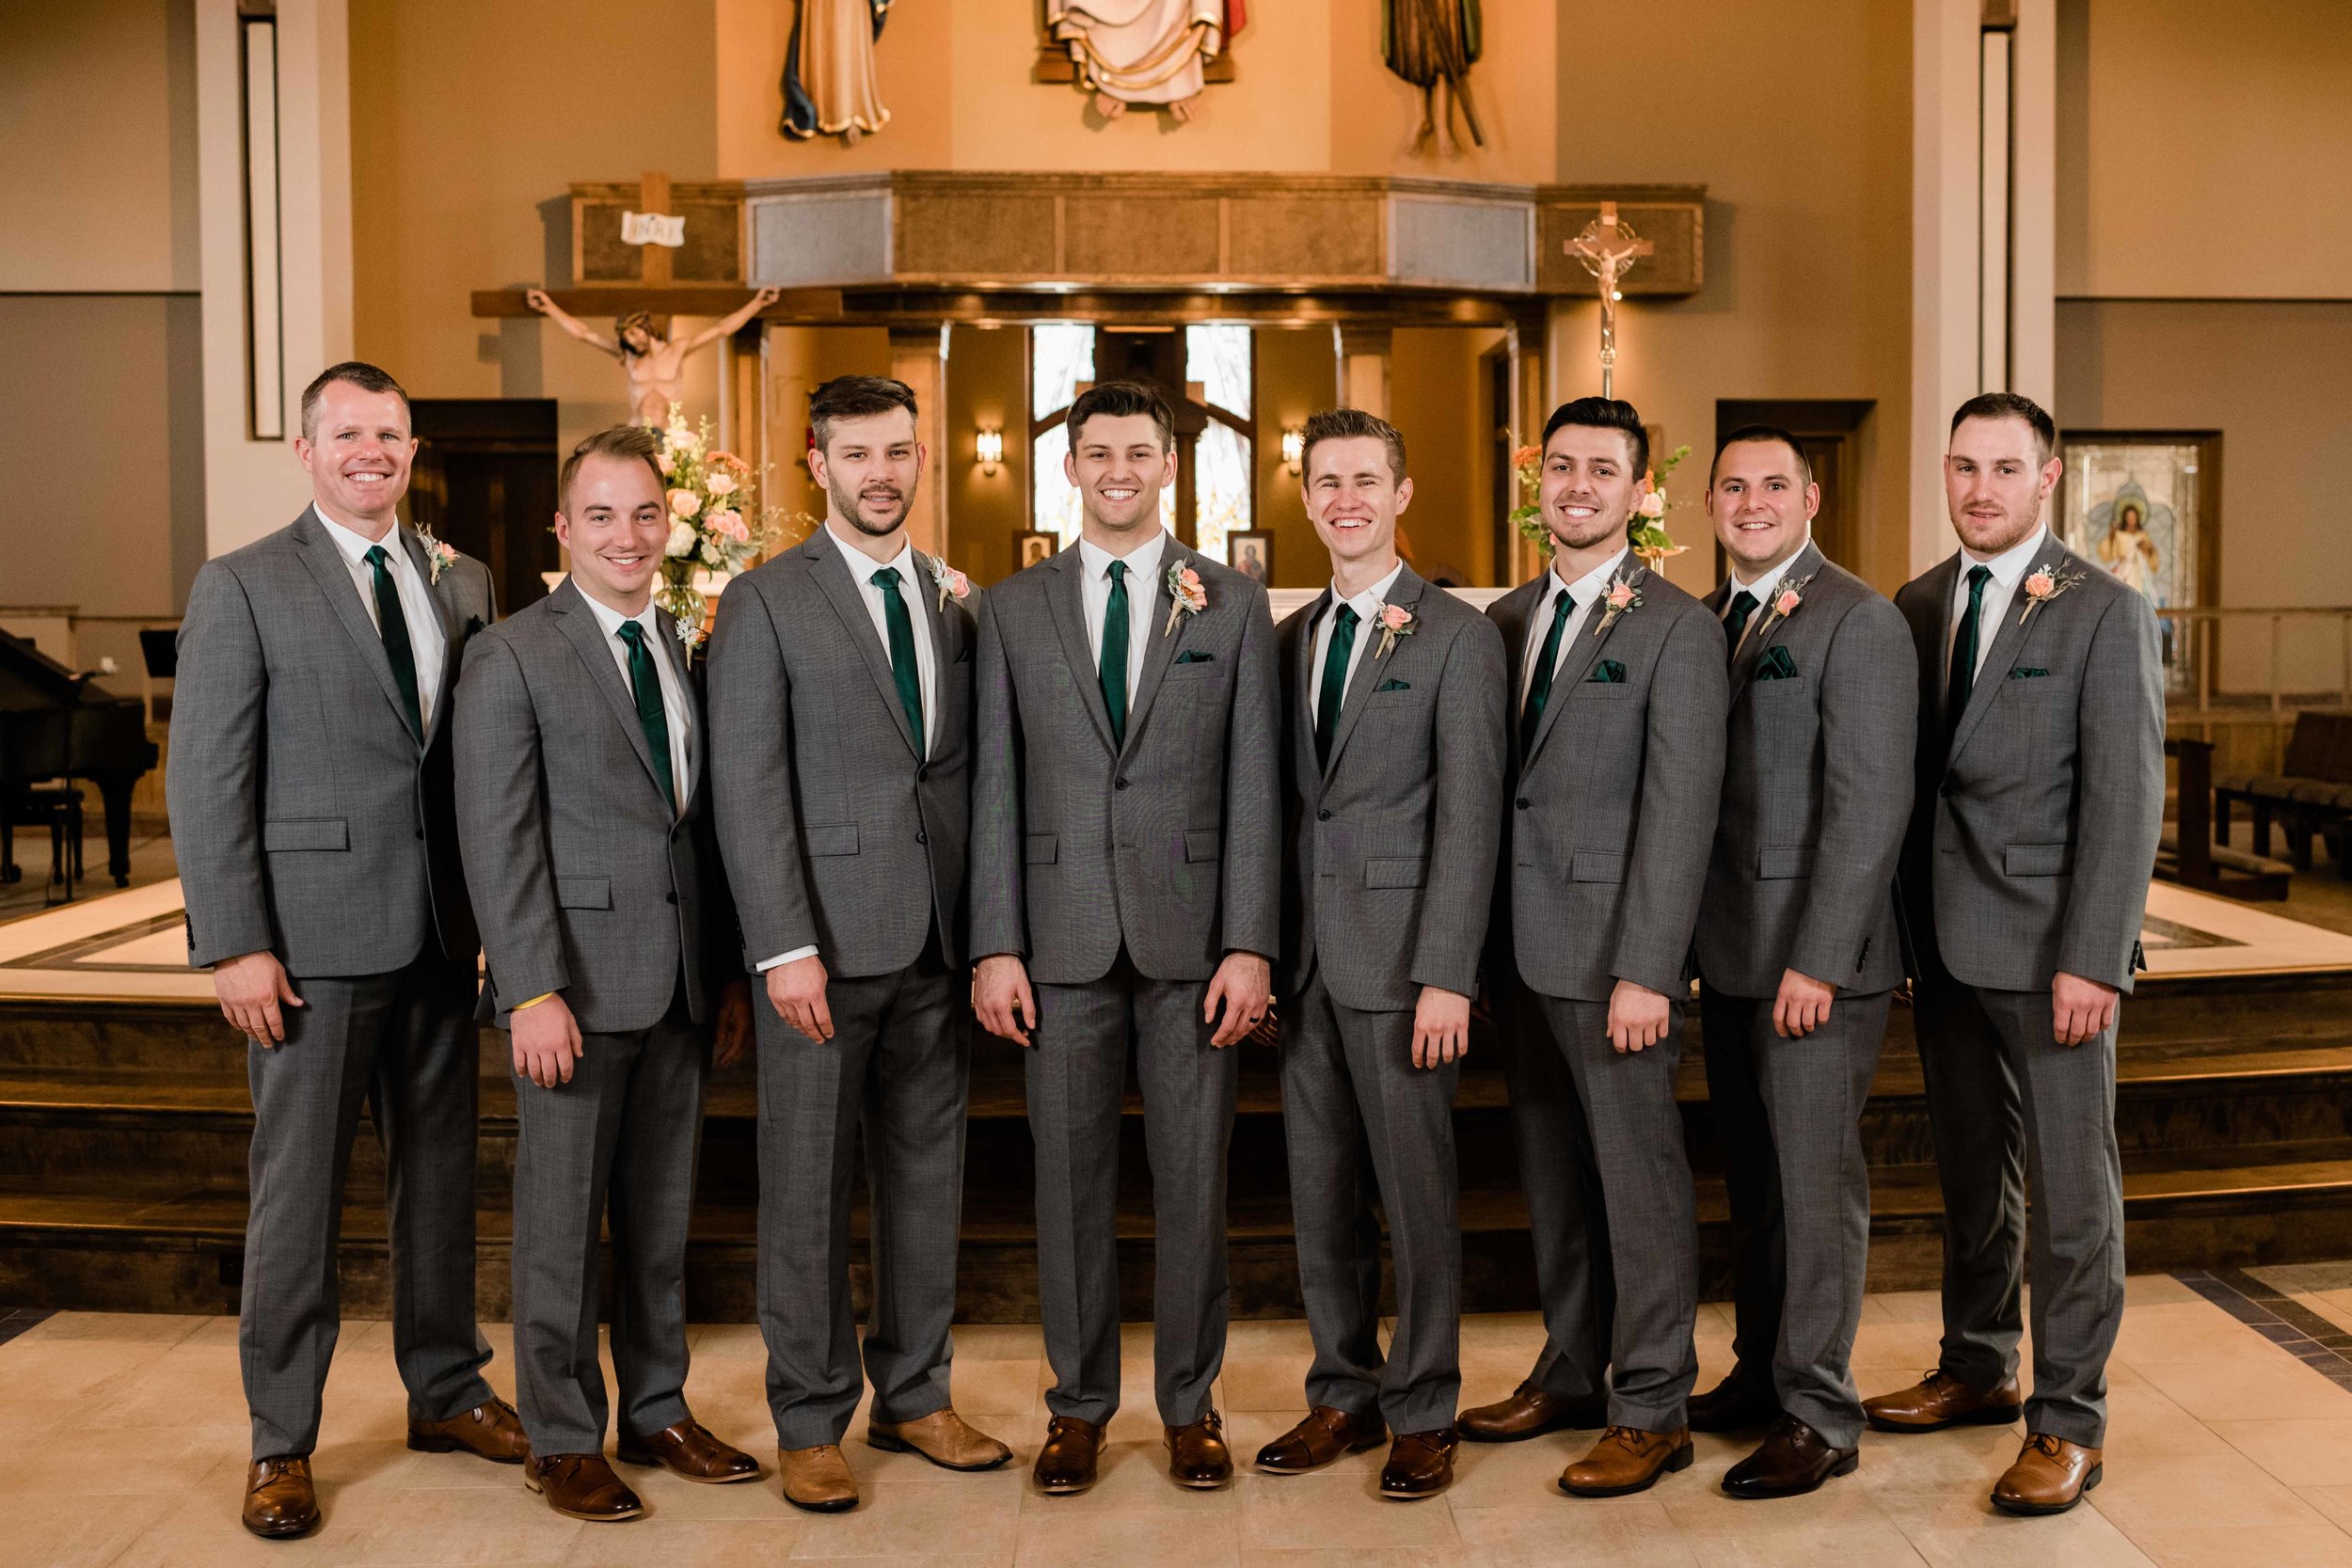 Groom and his groomsmen at the altar